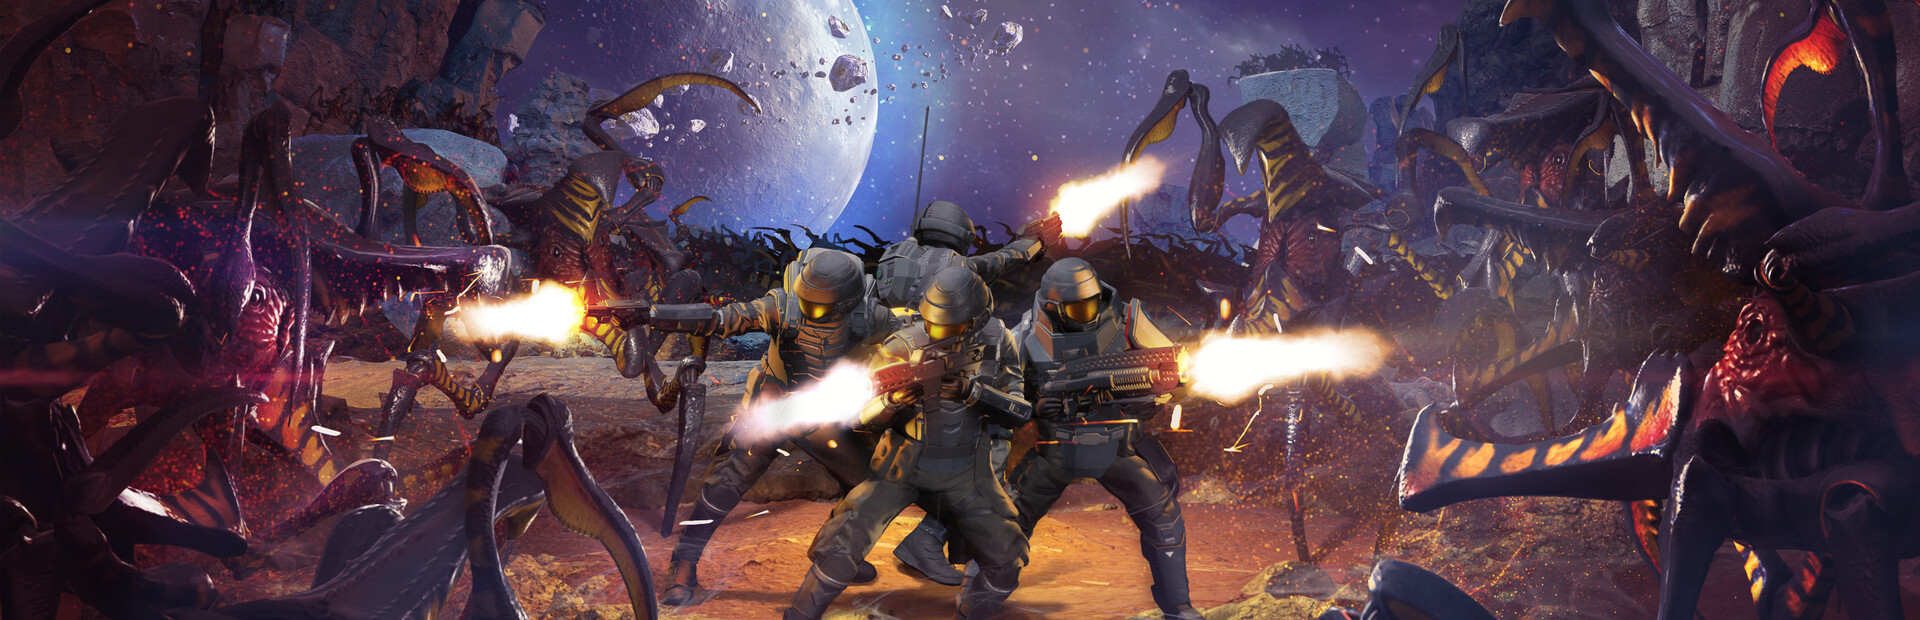 Starship Troopers: Extermination cover image